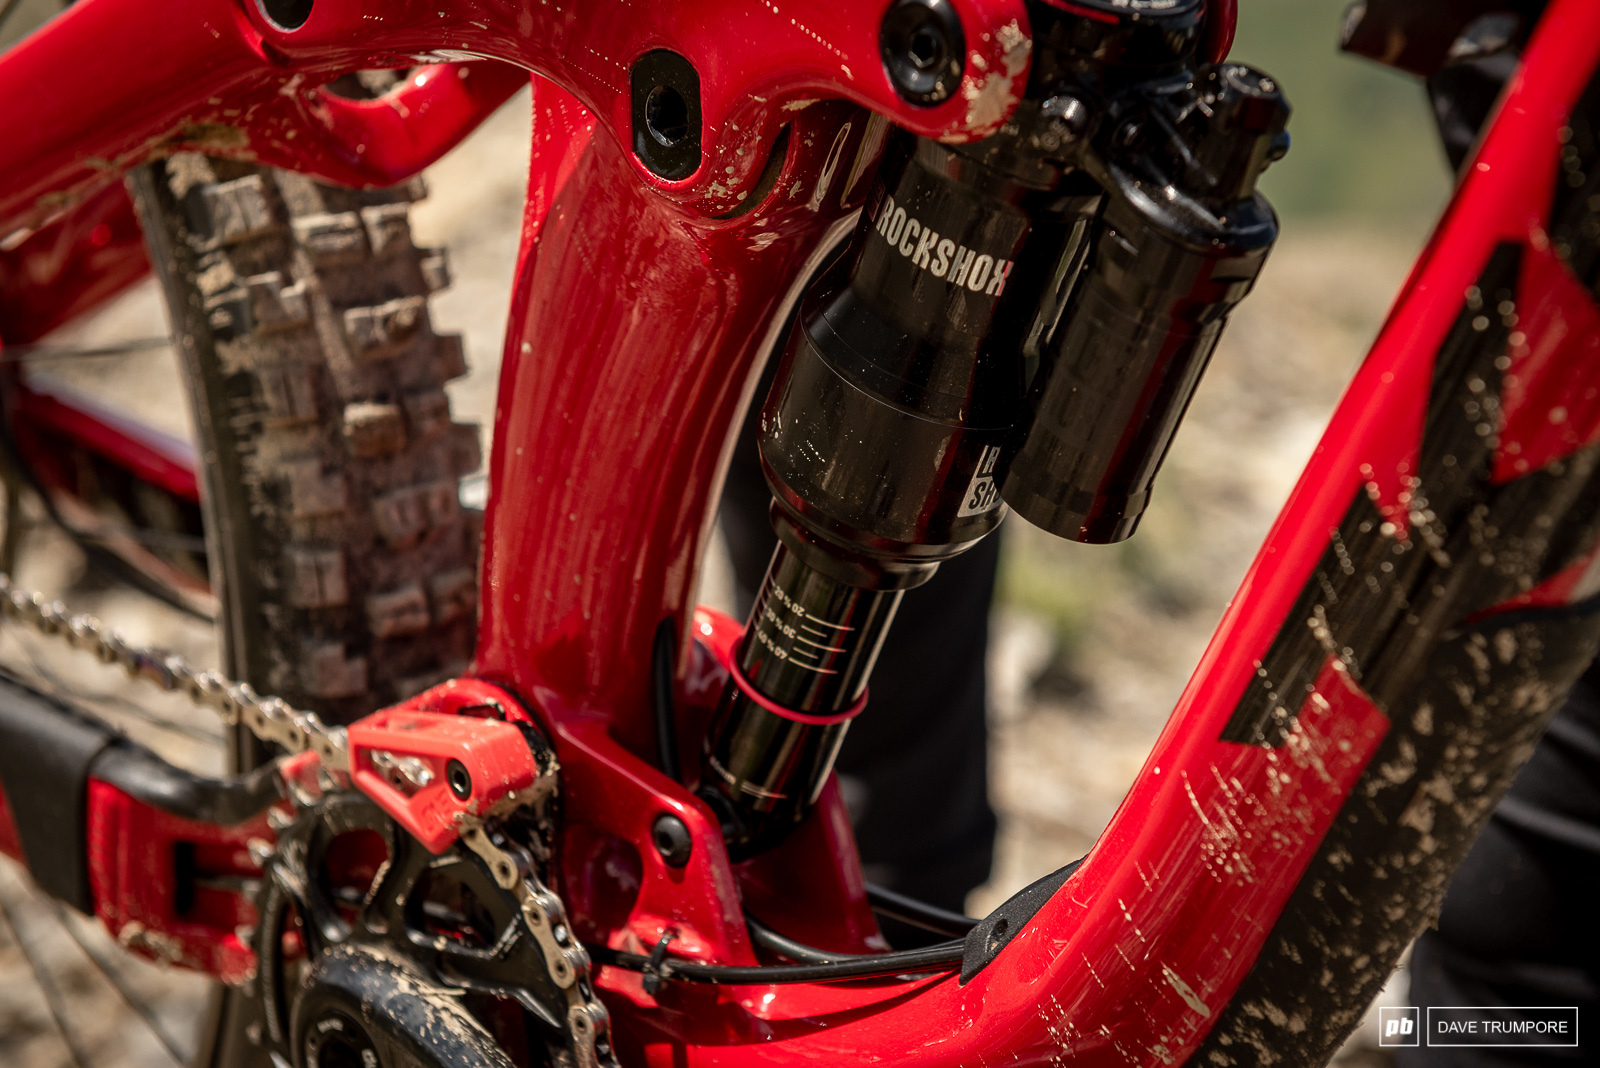 Keegan Wright's Devinci Spartan - Rock Shox Super Deluxe rear shock, and One Up chain guide